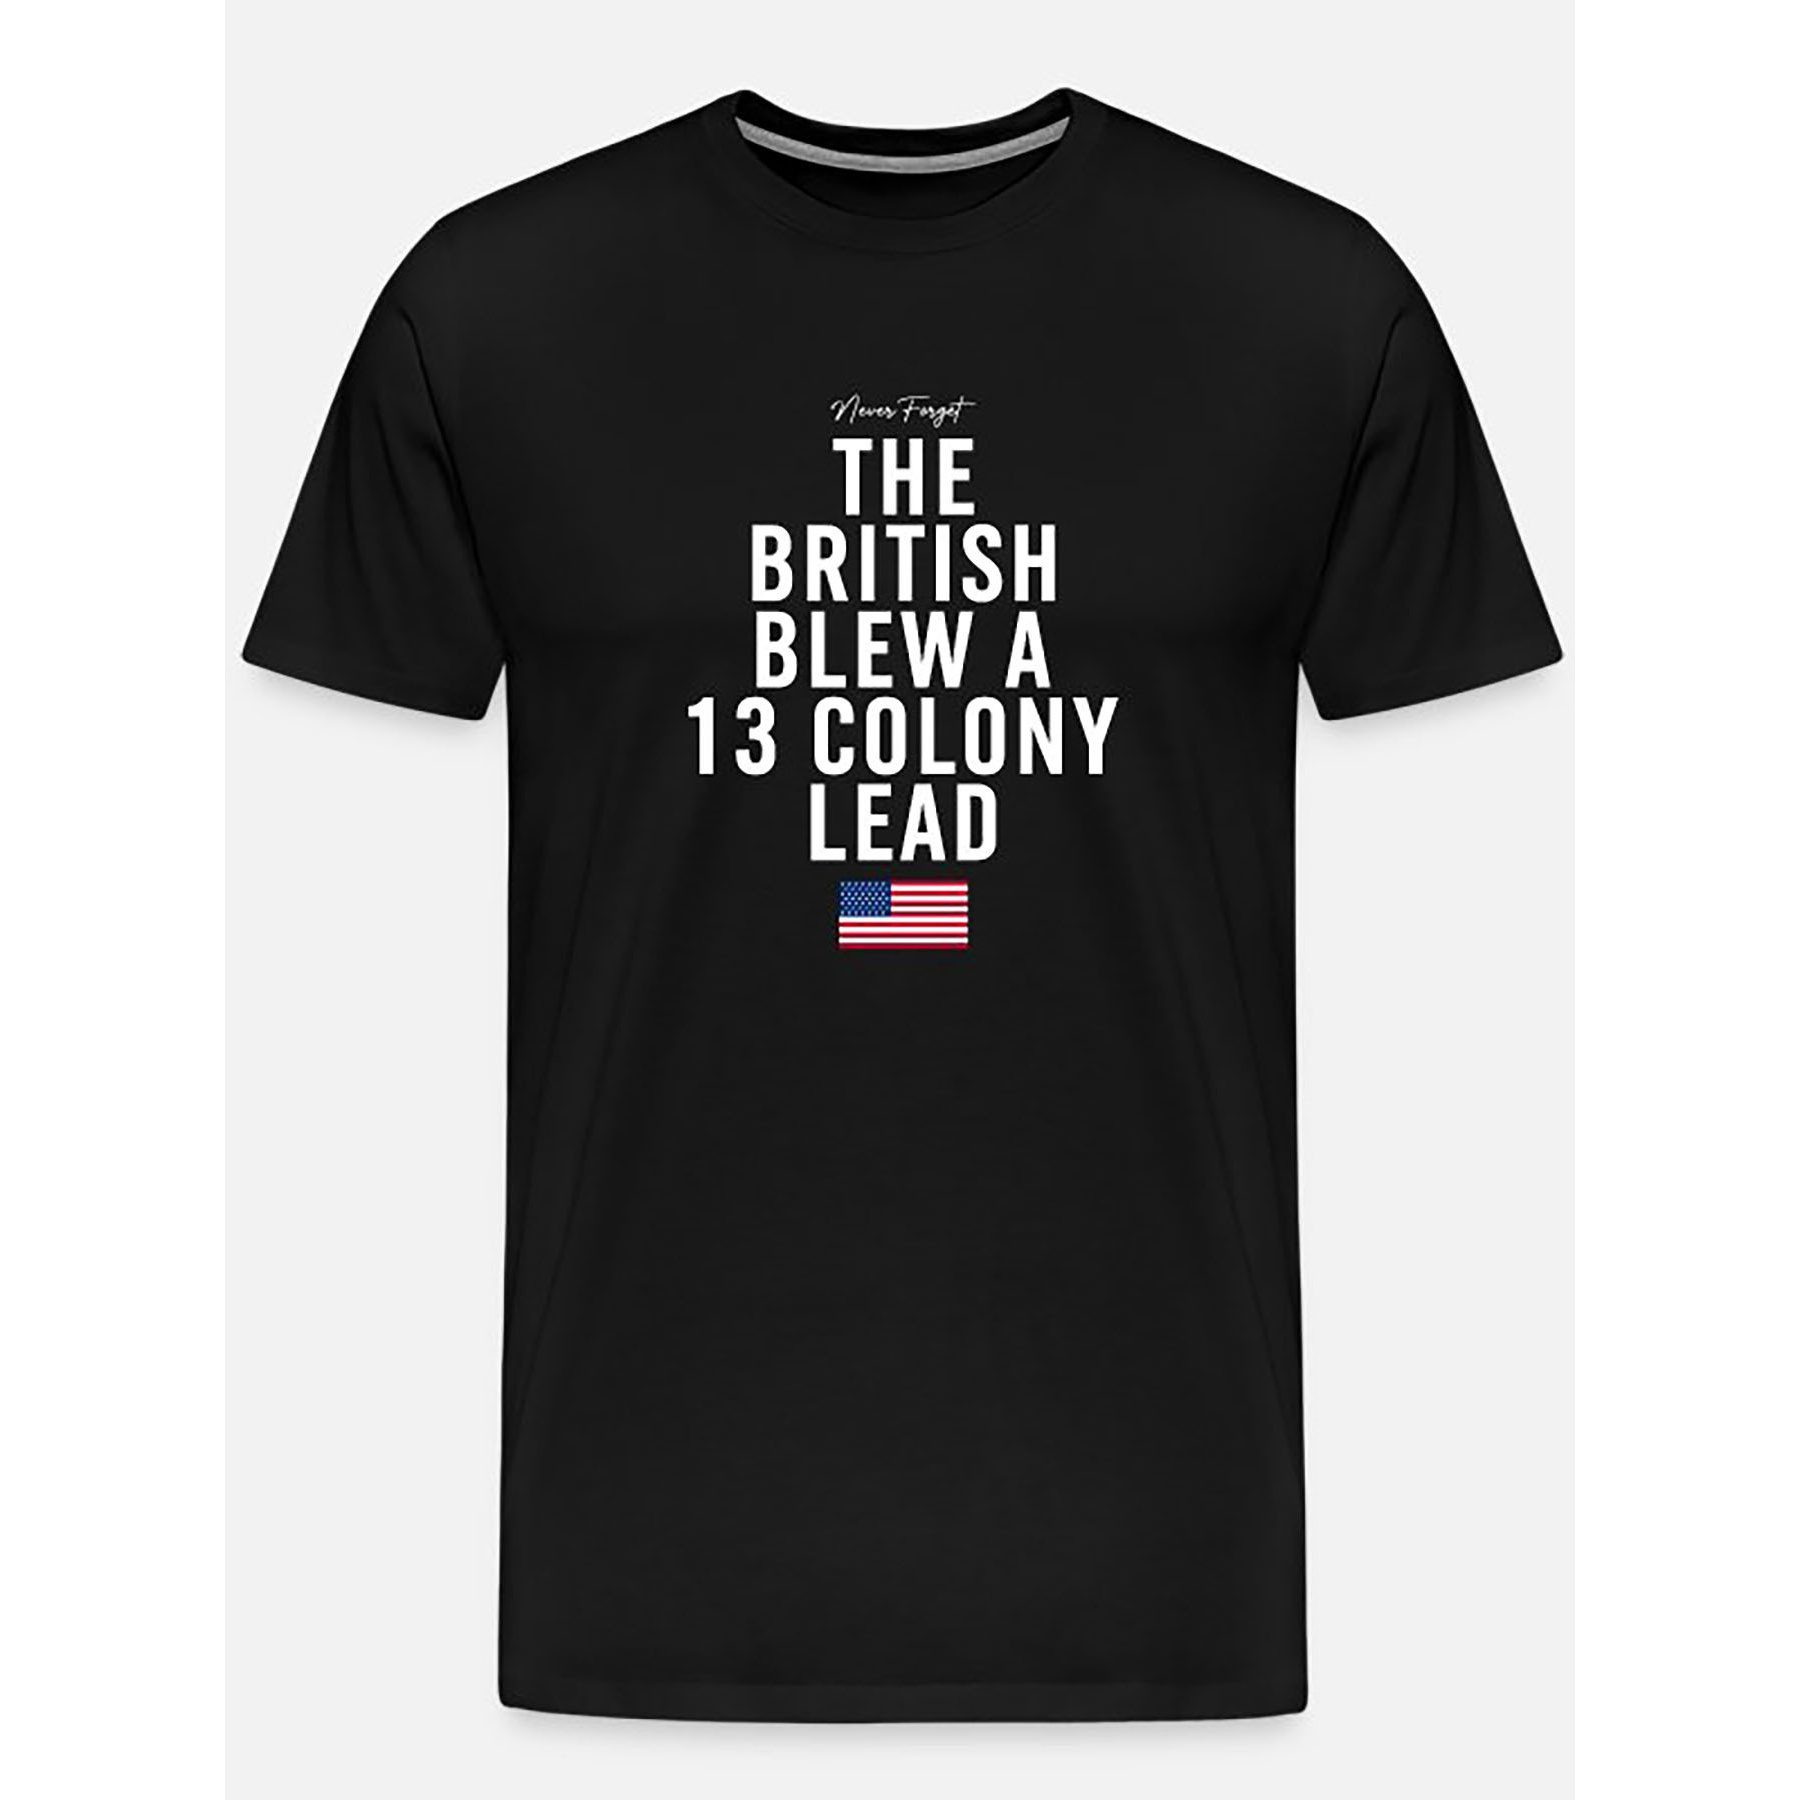 

The British Blew A Colony Lead White-6424 Funny Men's Short Sleeve Graphic T-shirt Collection Black